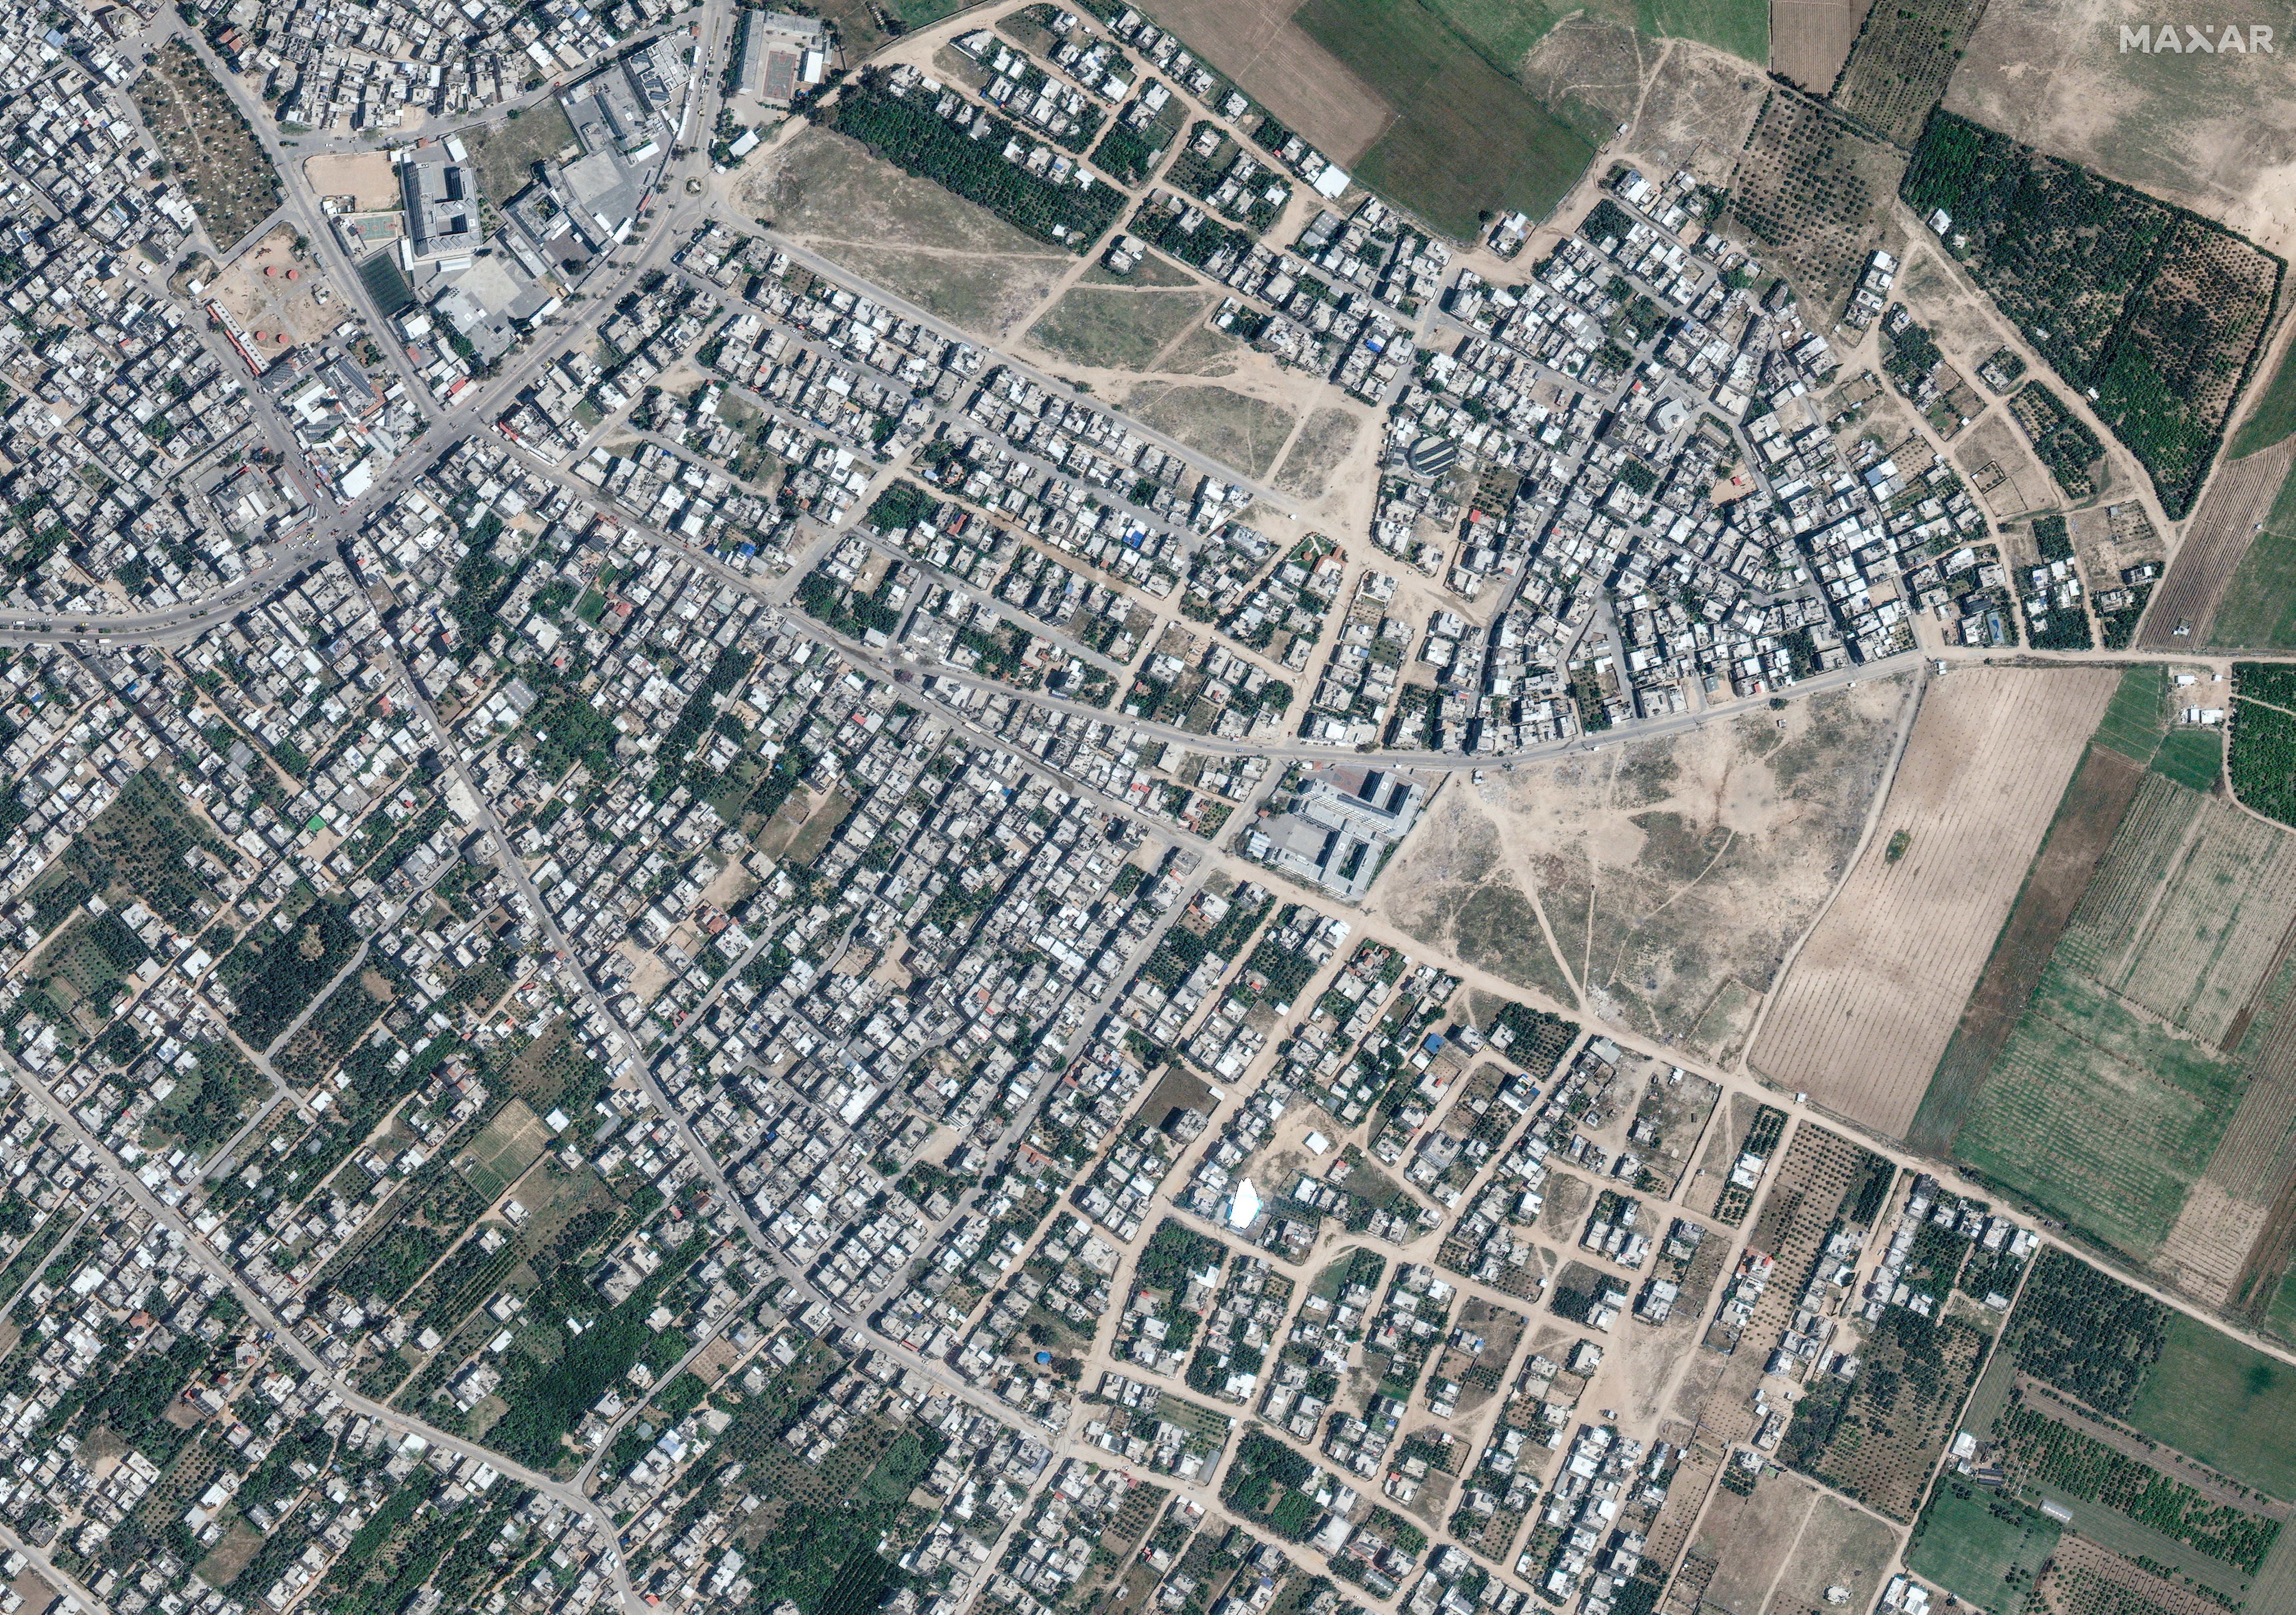 Satellite view shows the Palestinian city of Beit Hanoun in the northern Gaza Strip on 1 May